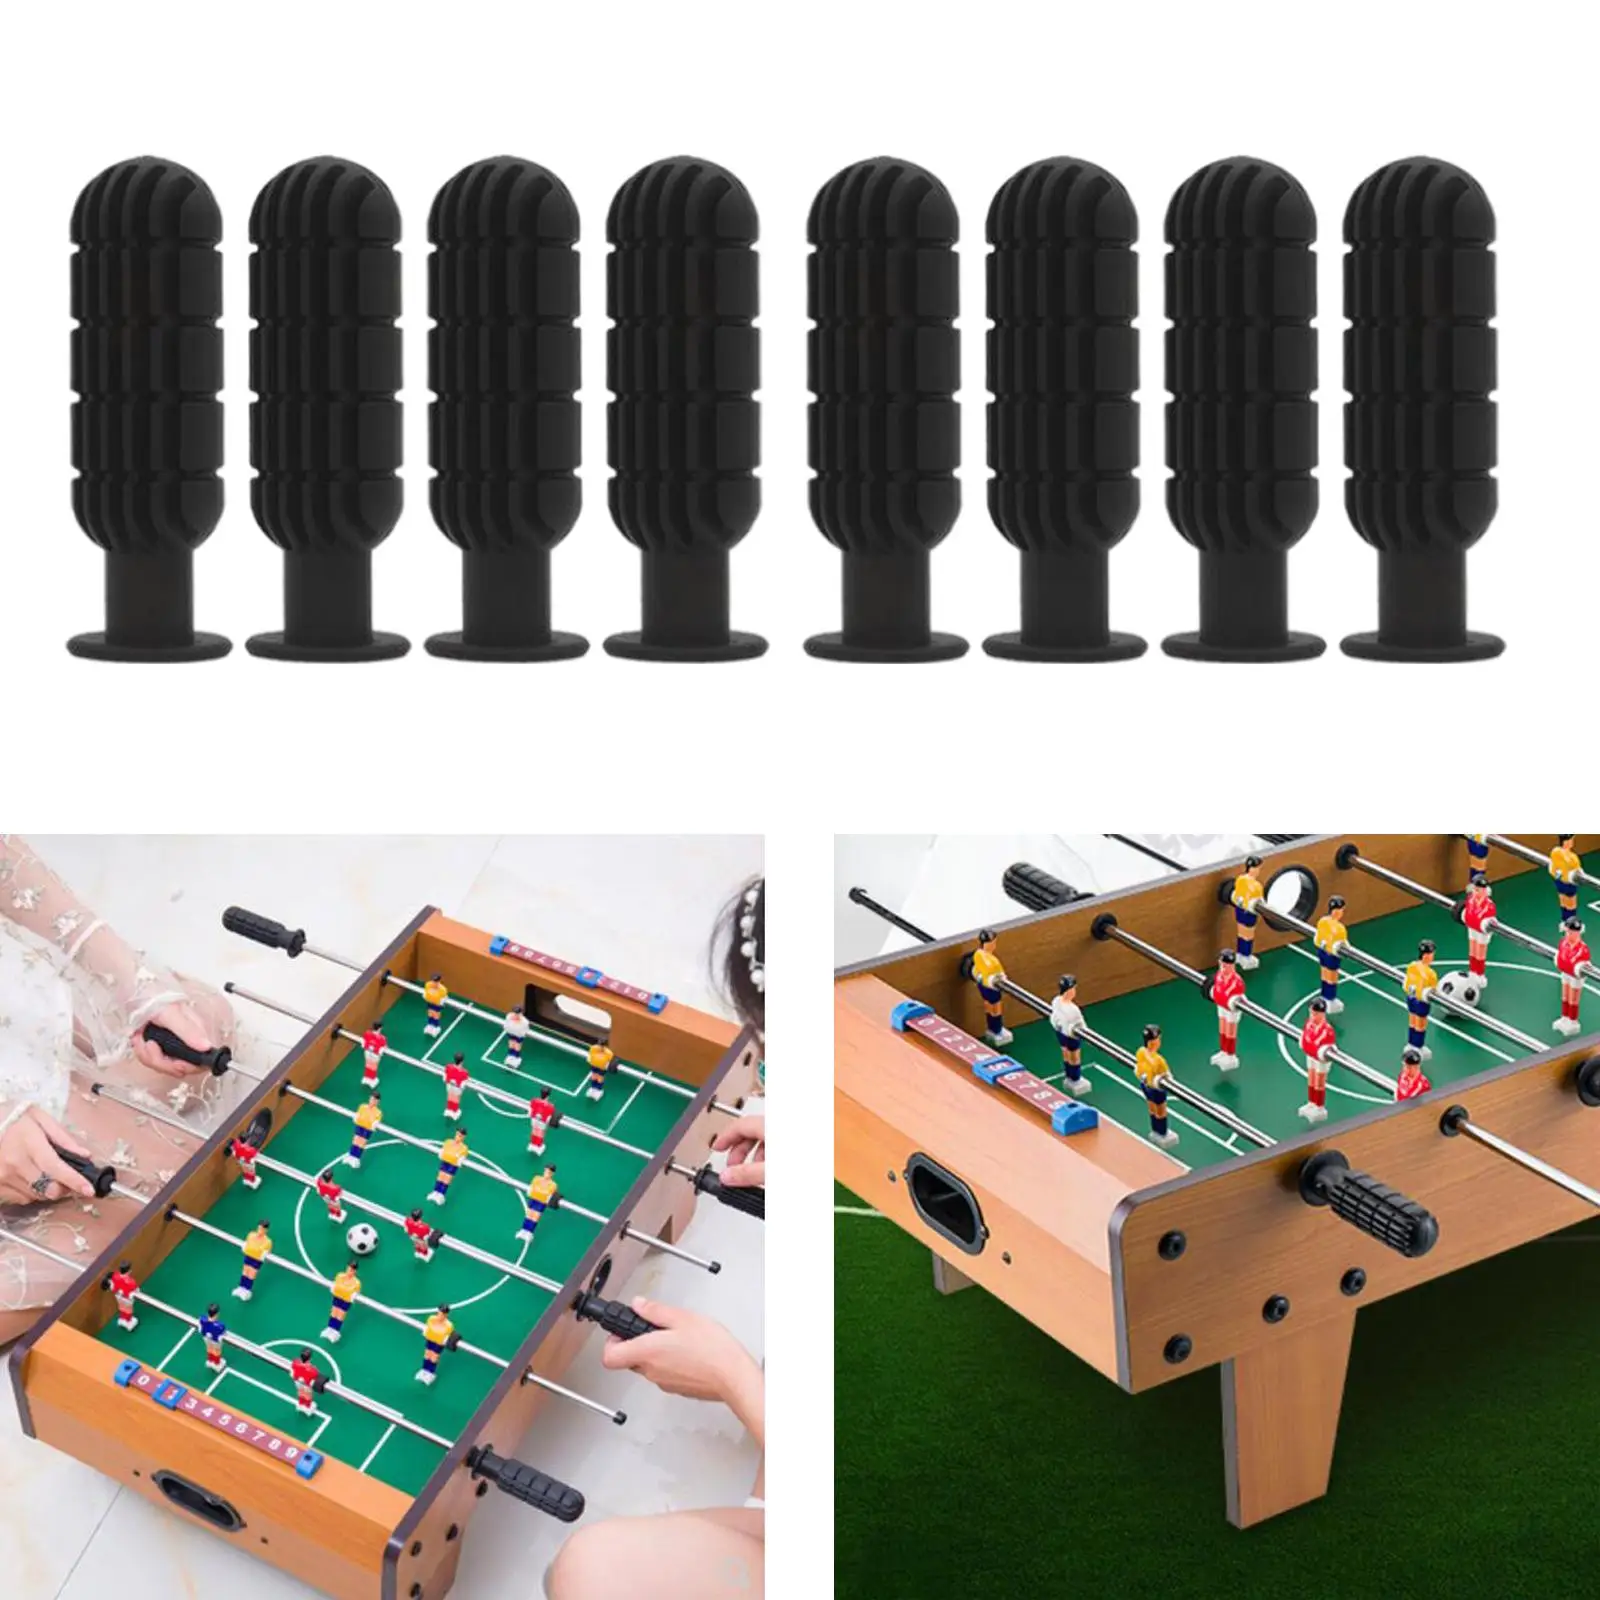 8 Pcs Universal Thicken Foosball Handle Grip Case for Foosball Table 